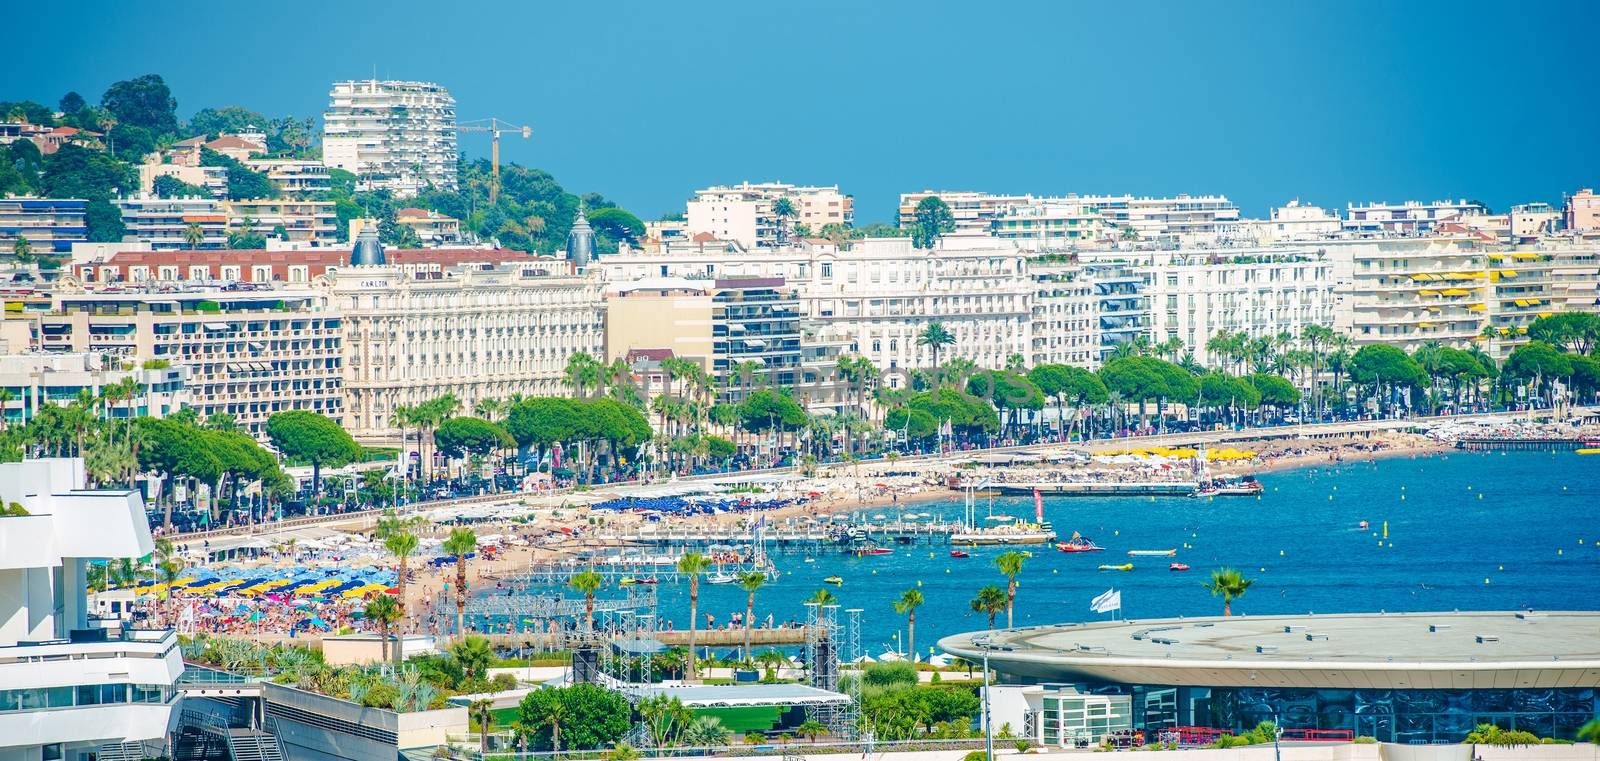 City of Cannes France by welcomia